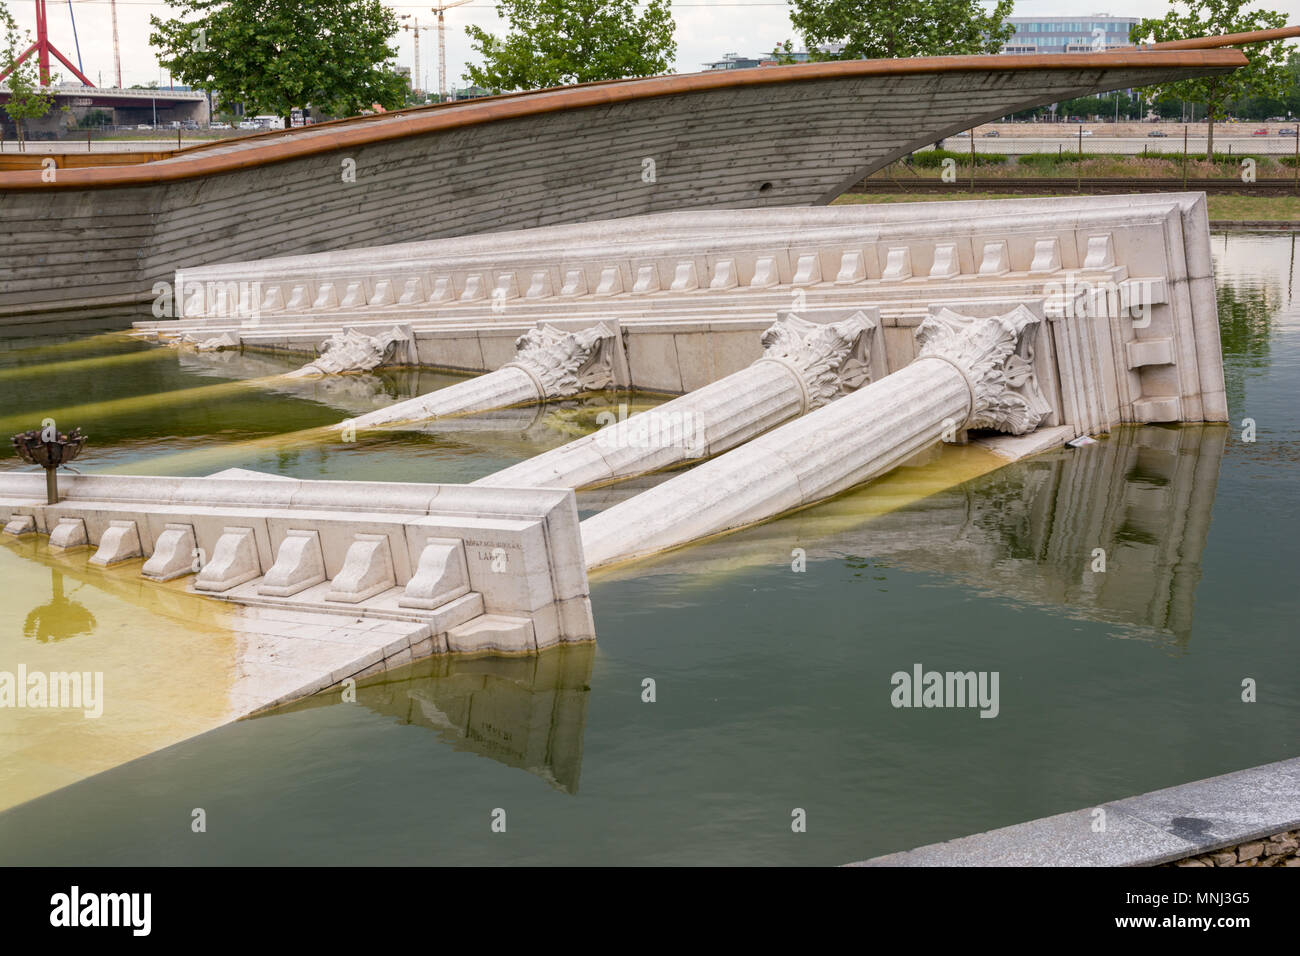 BUDAPEST, HUNGARY - MAY 17, 2018: Fake ancient greek ruins at National theater at Budapest, Hungary. Can be found in the park front of the theater. Stock Photo